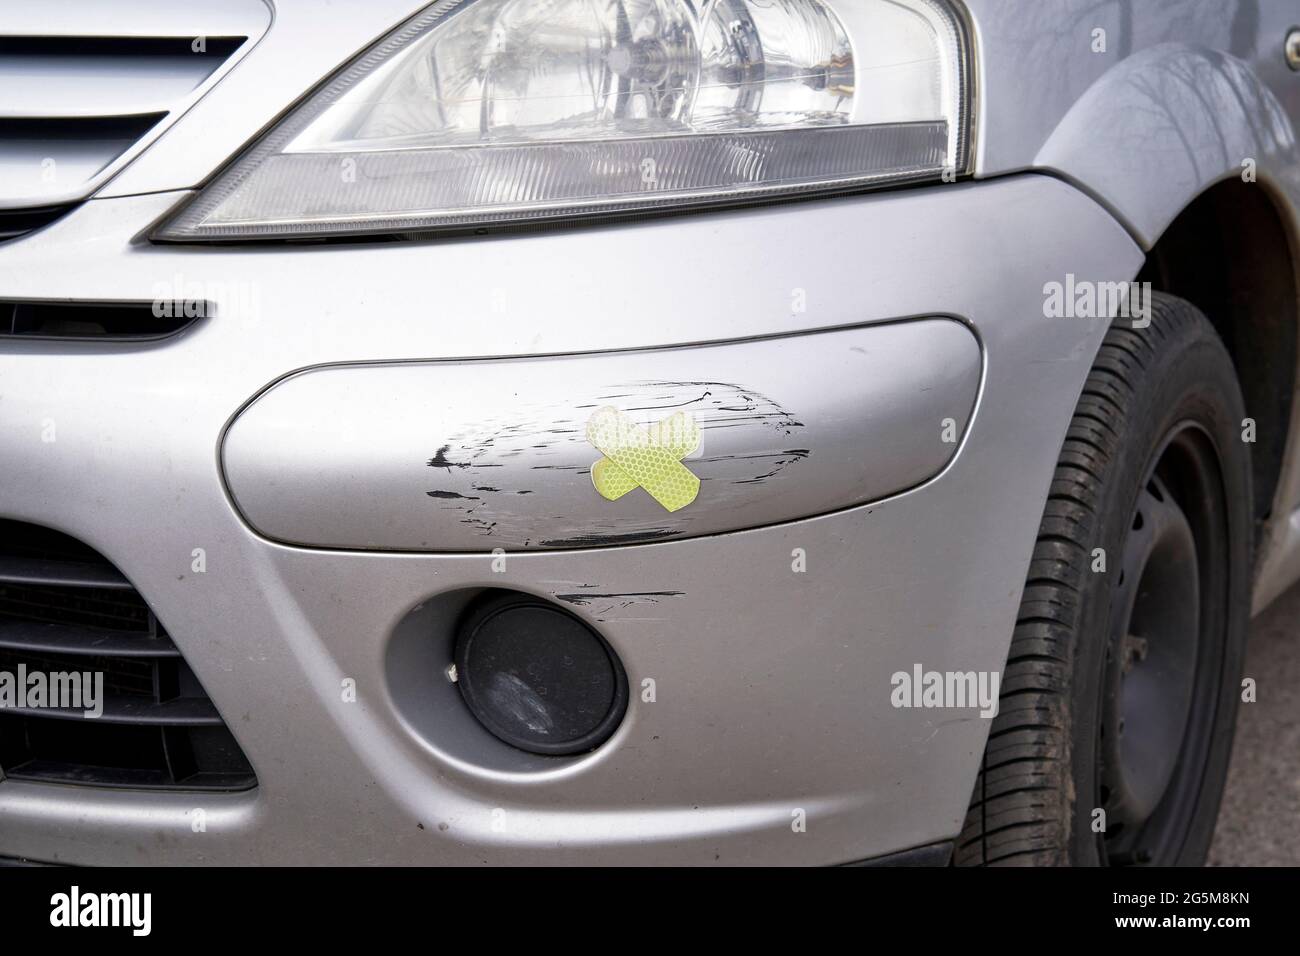 Band aid sticking plasters on a damaged section of car bodywork Stock Photo